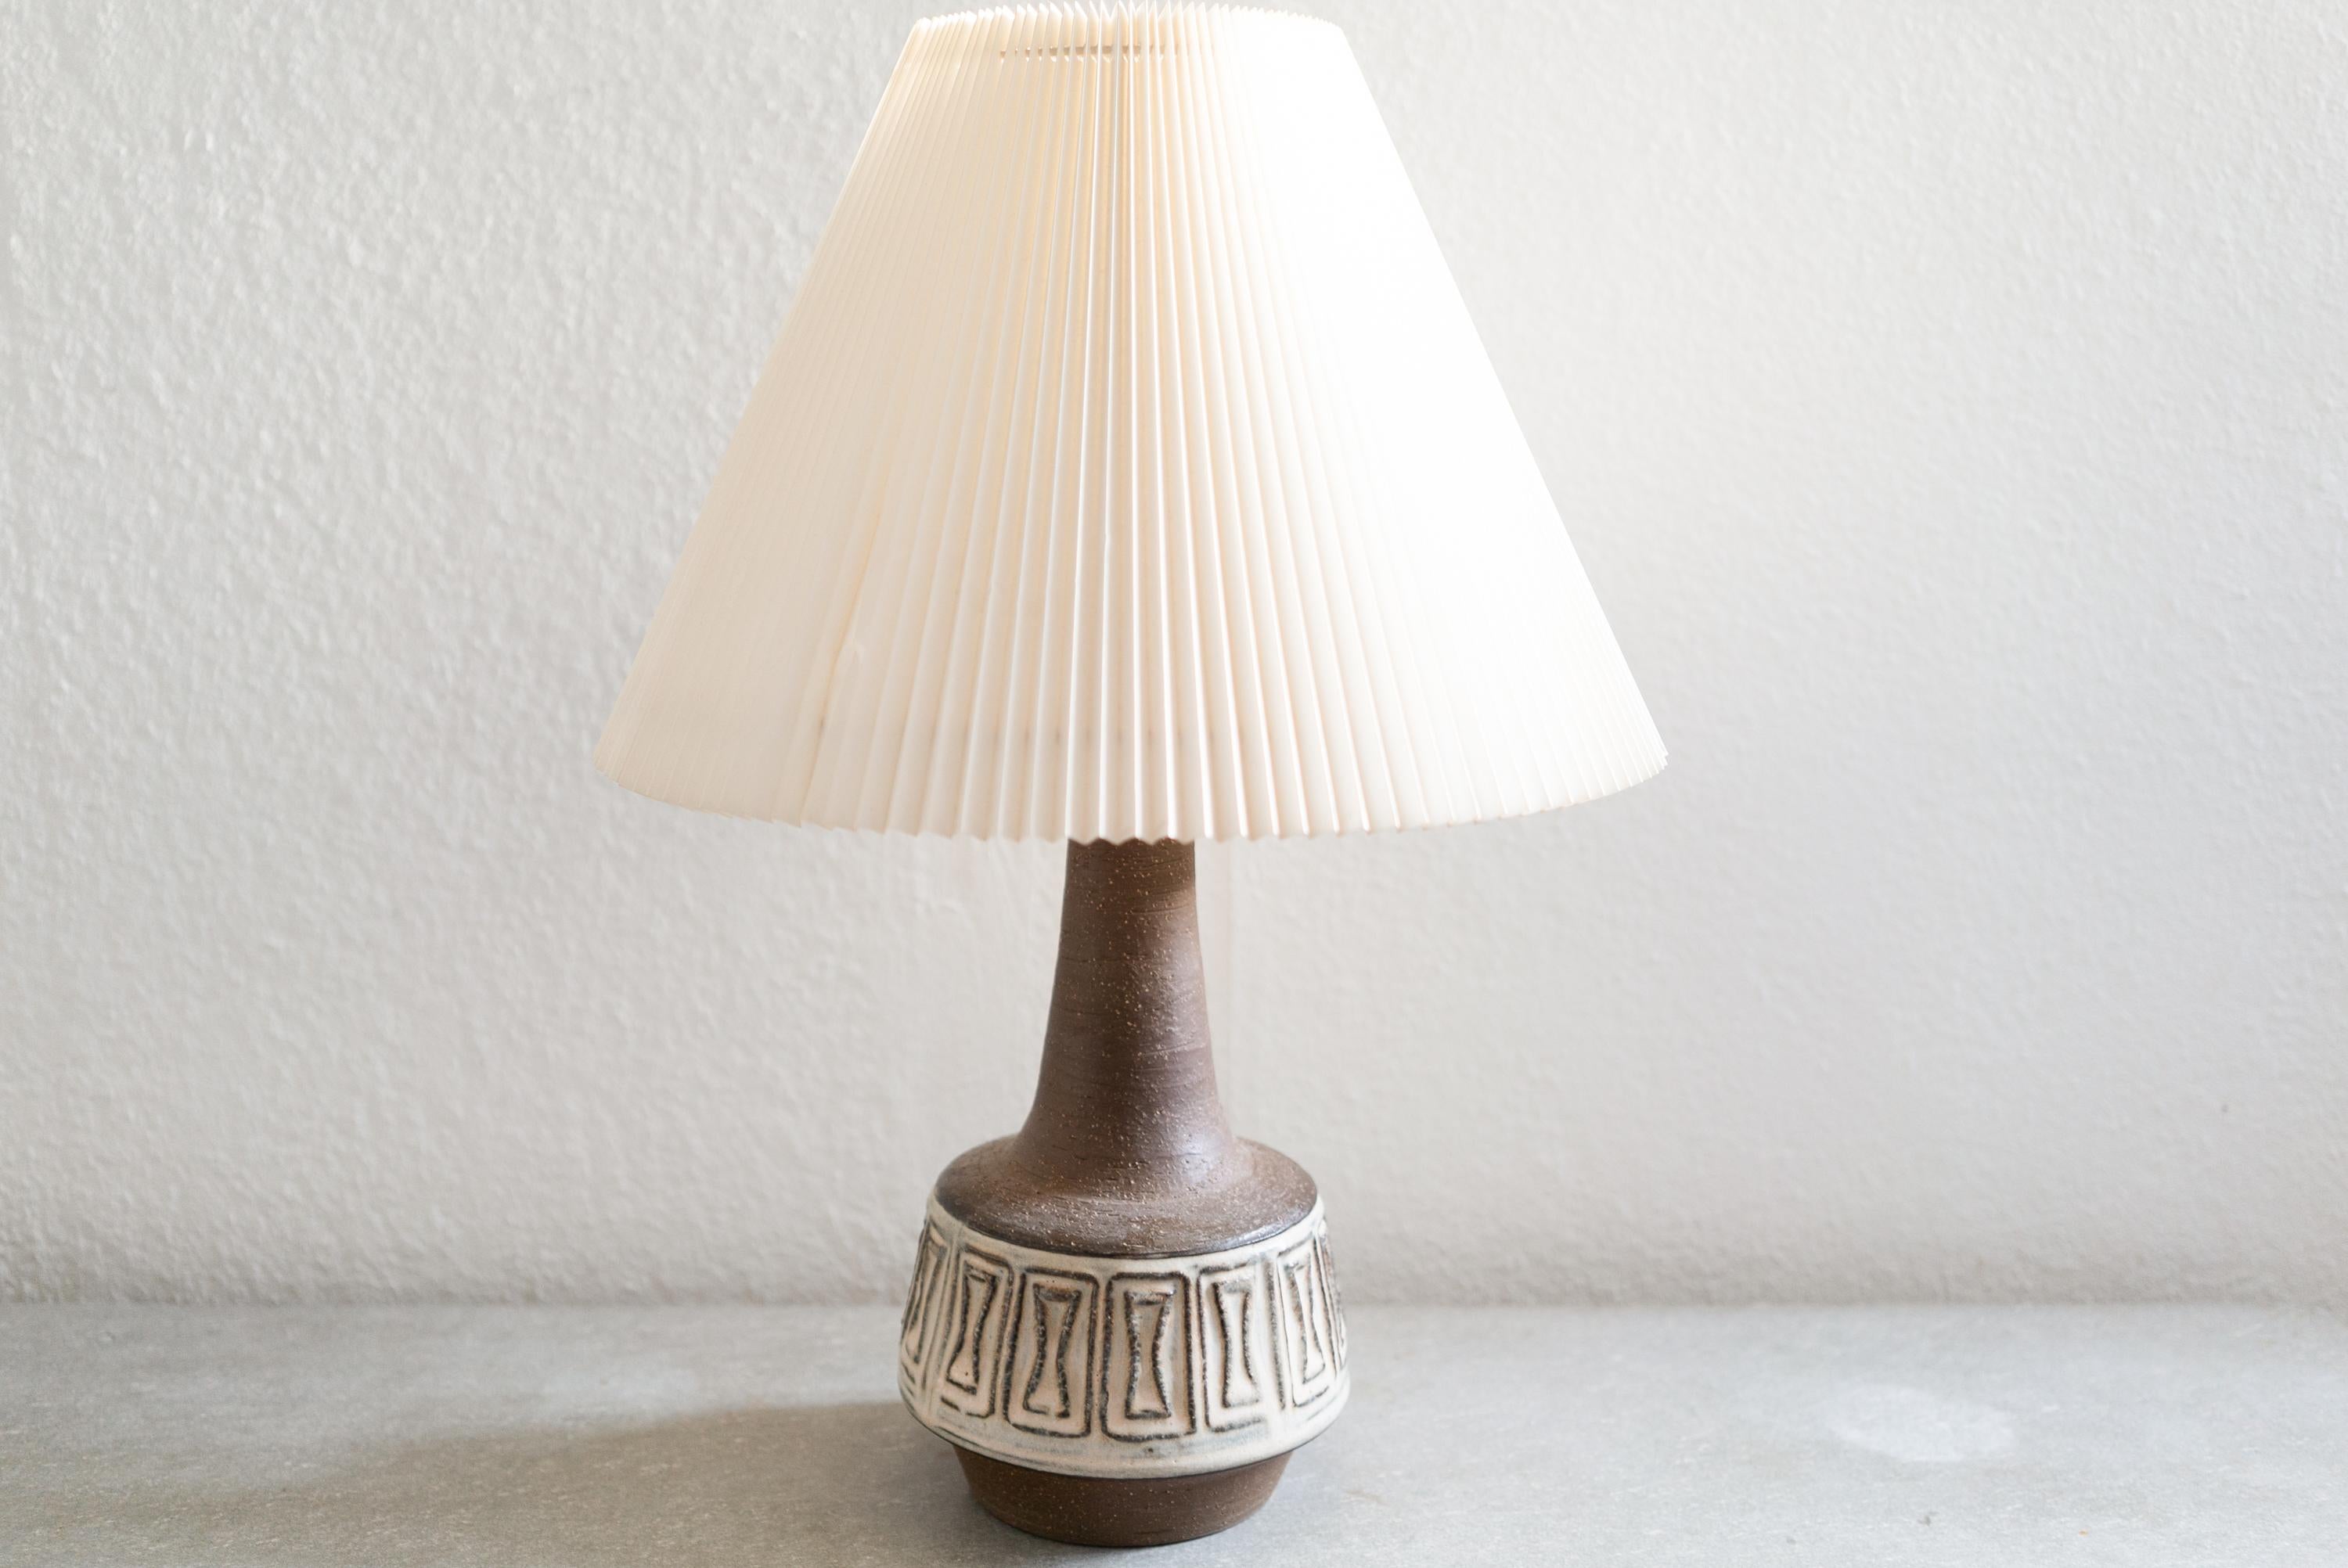 A stoneware table lamp handmadeg Michael Andersen & Son, located on the island of Bornholm in Denmark in the 1960s.

Stamped and signed on the base.

Sold without lampshade. Height includes socket. fully functional and in beautiful condition.